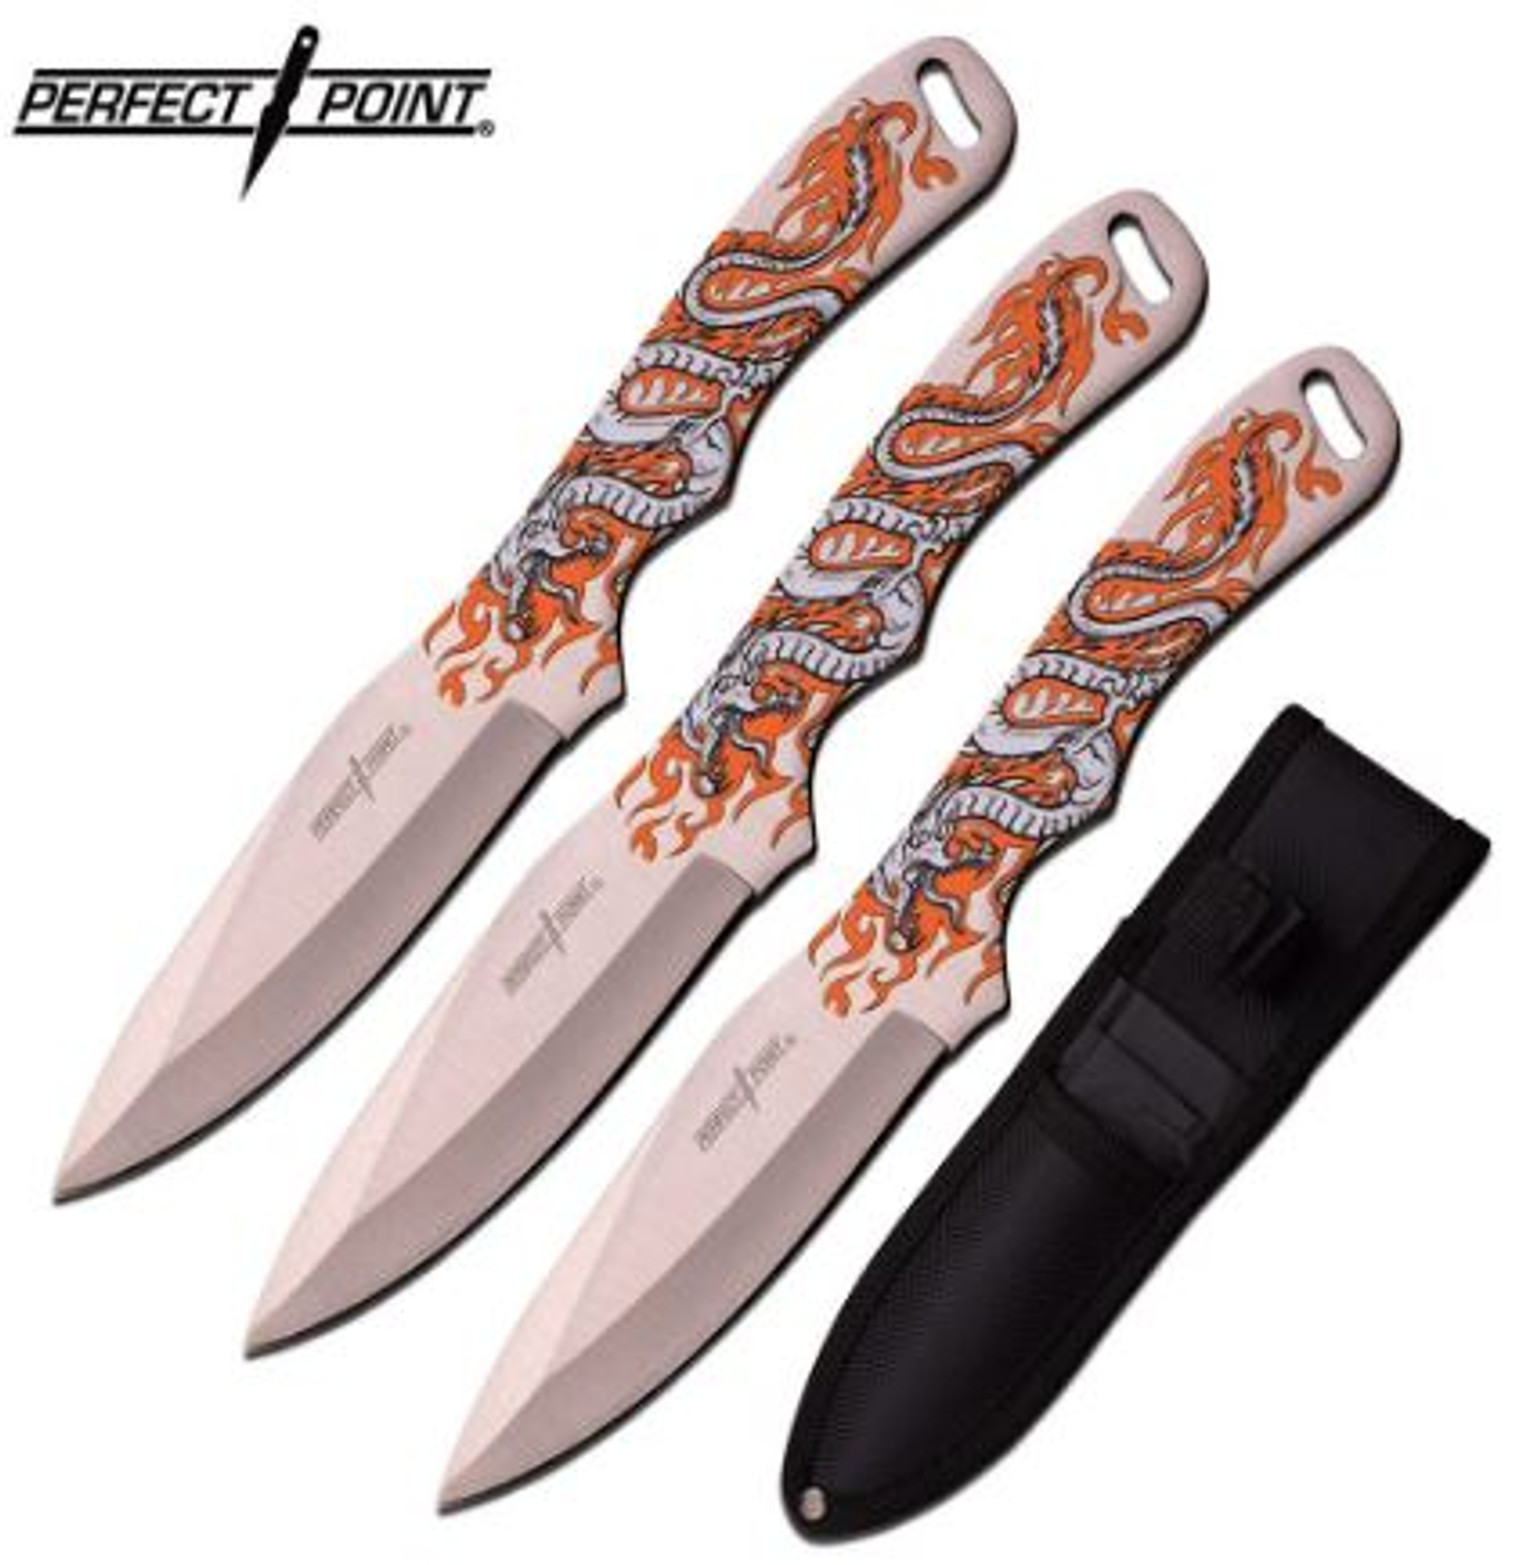 Perfect Point 1123SY Throwing Knife Set